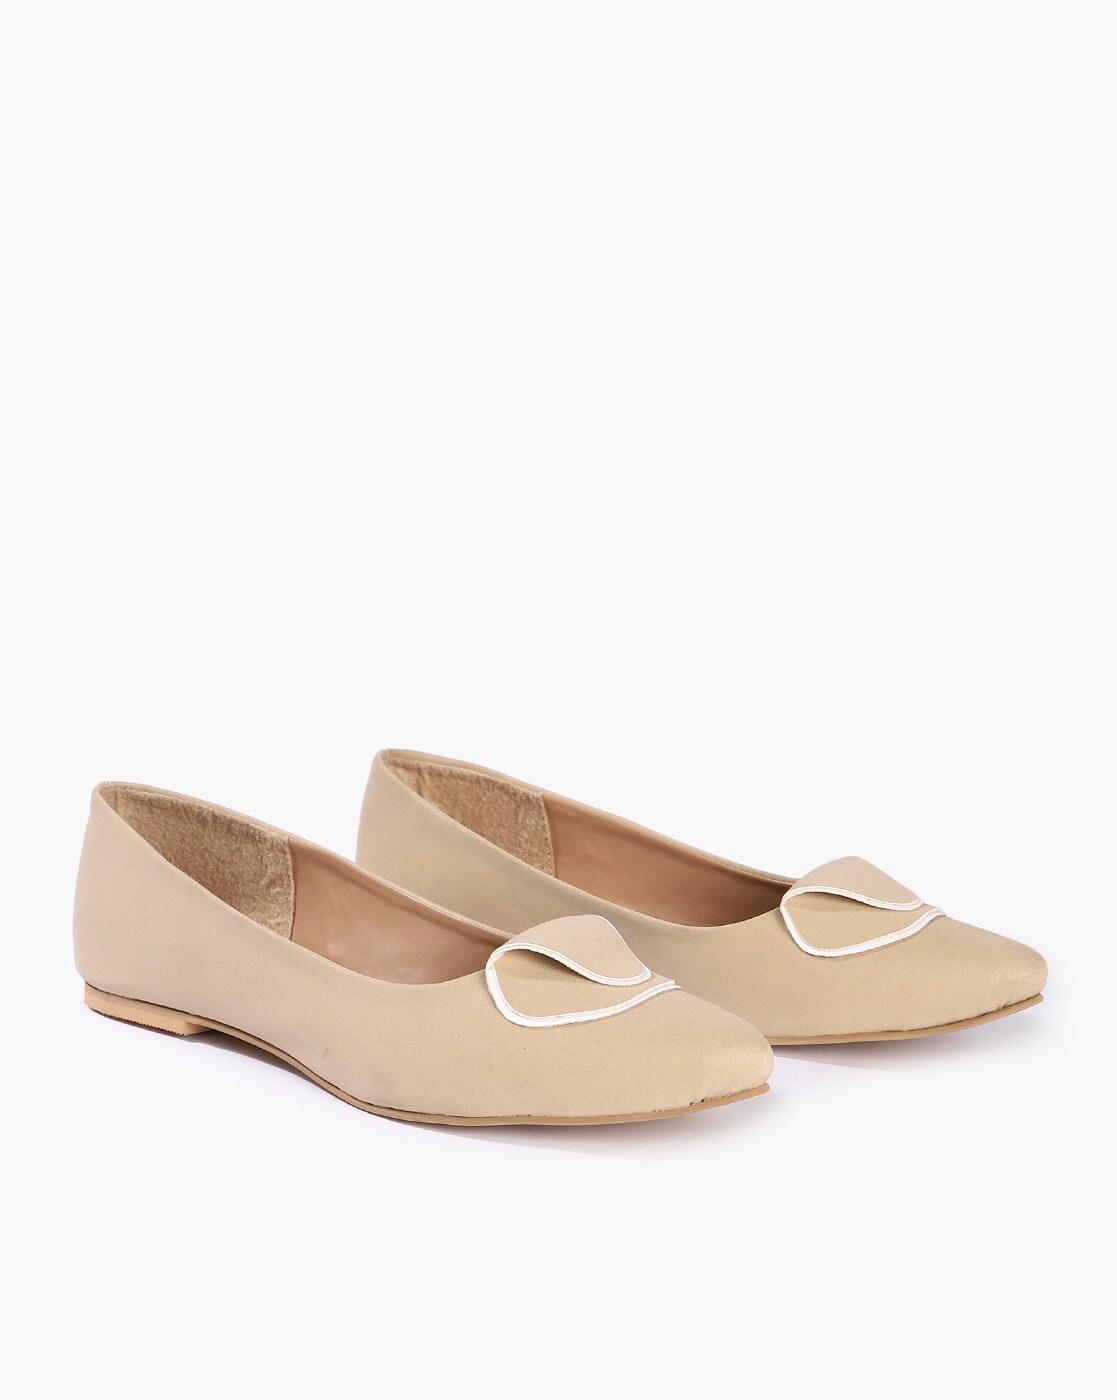 Beige Flat Shoes for Women by Sanhose 